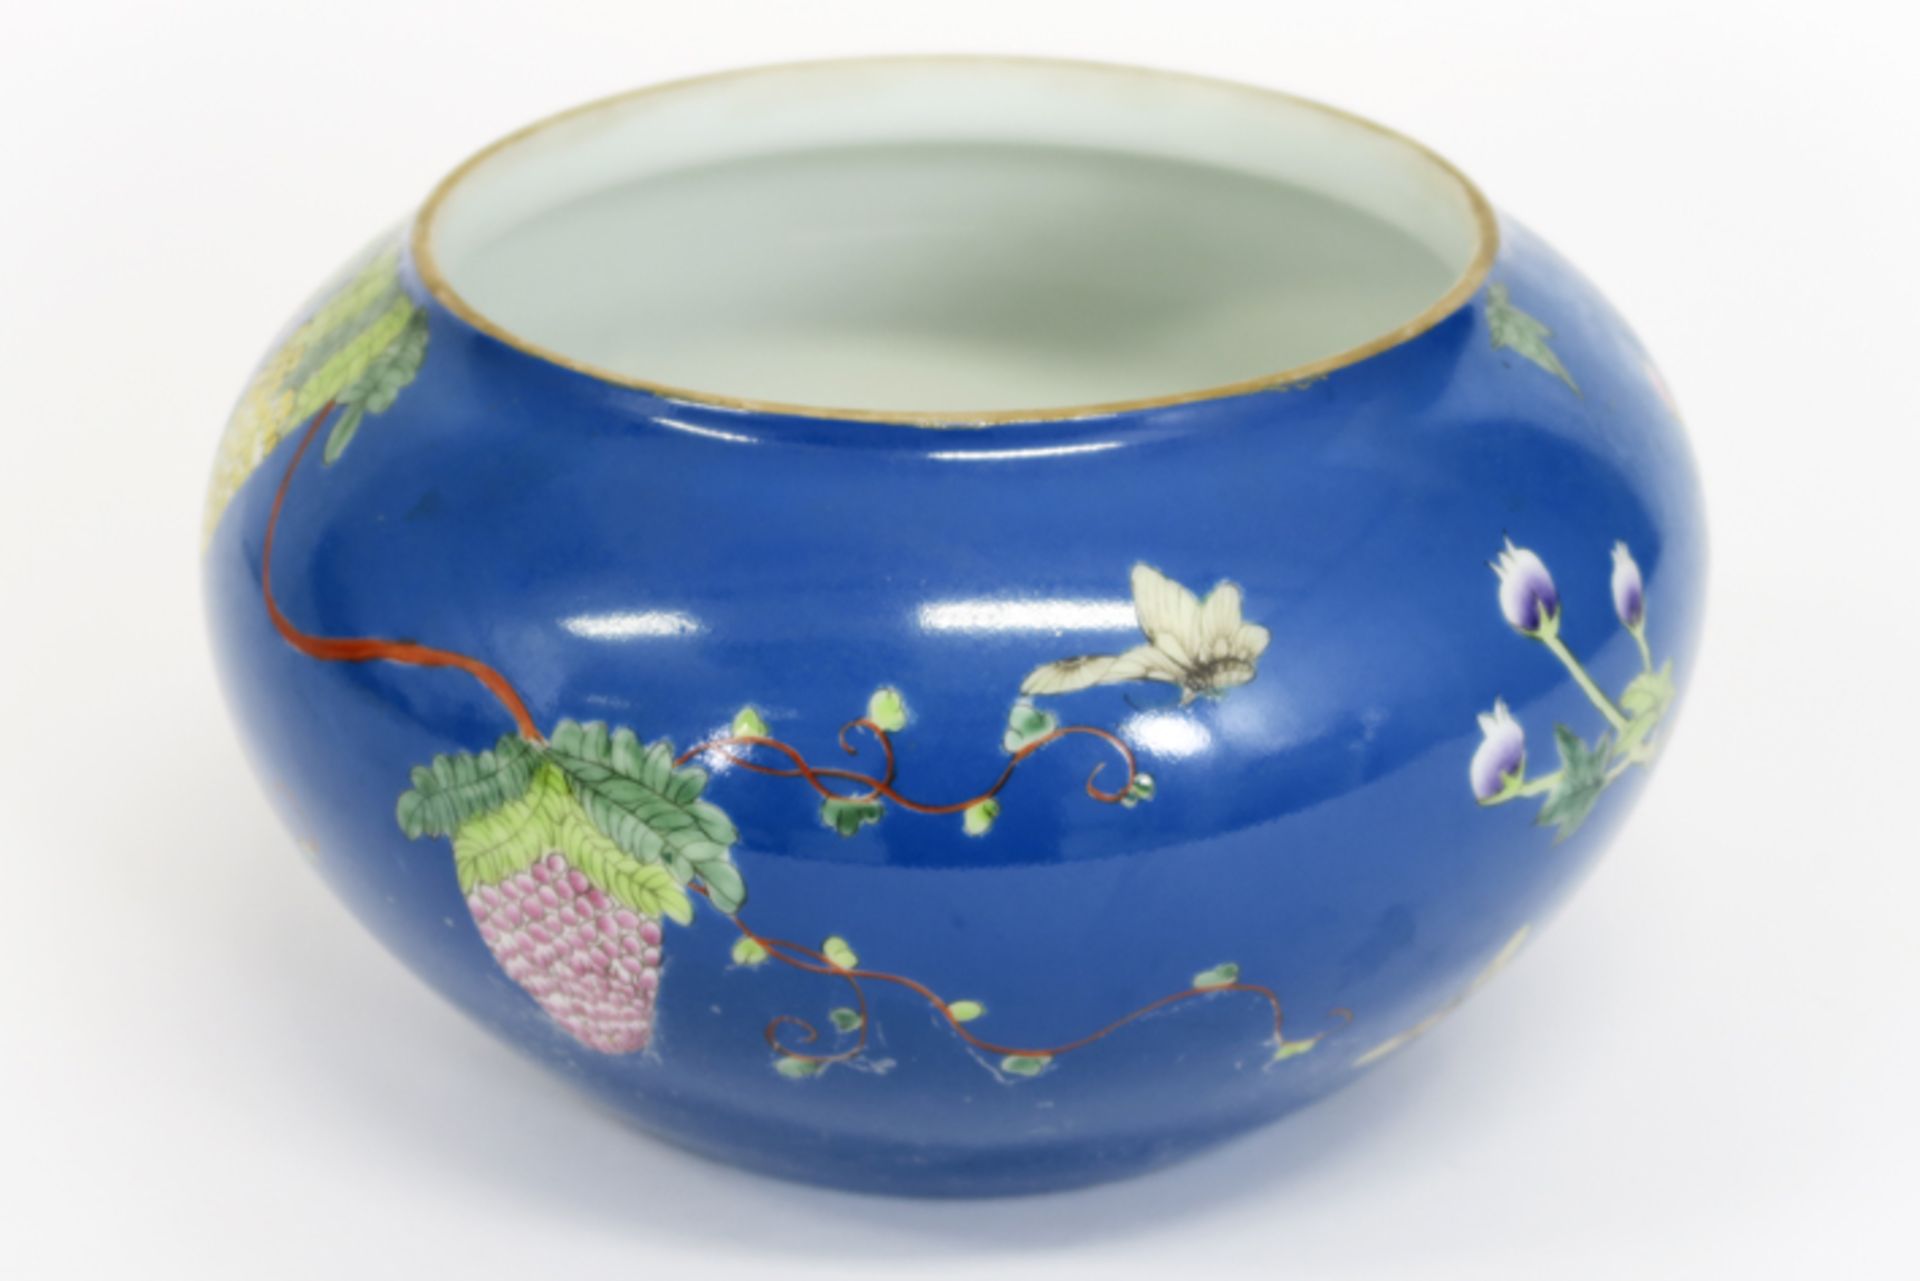 Chinese jardinier in marked porcelain with a polychrome flower and bird decor - - [...] - Image 2 of 4